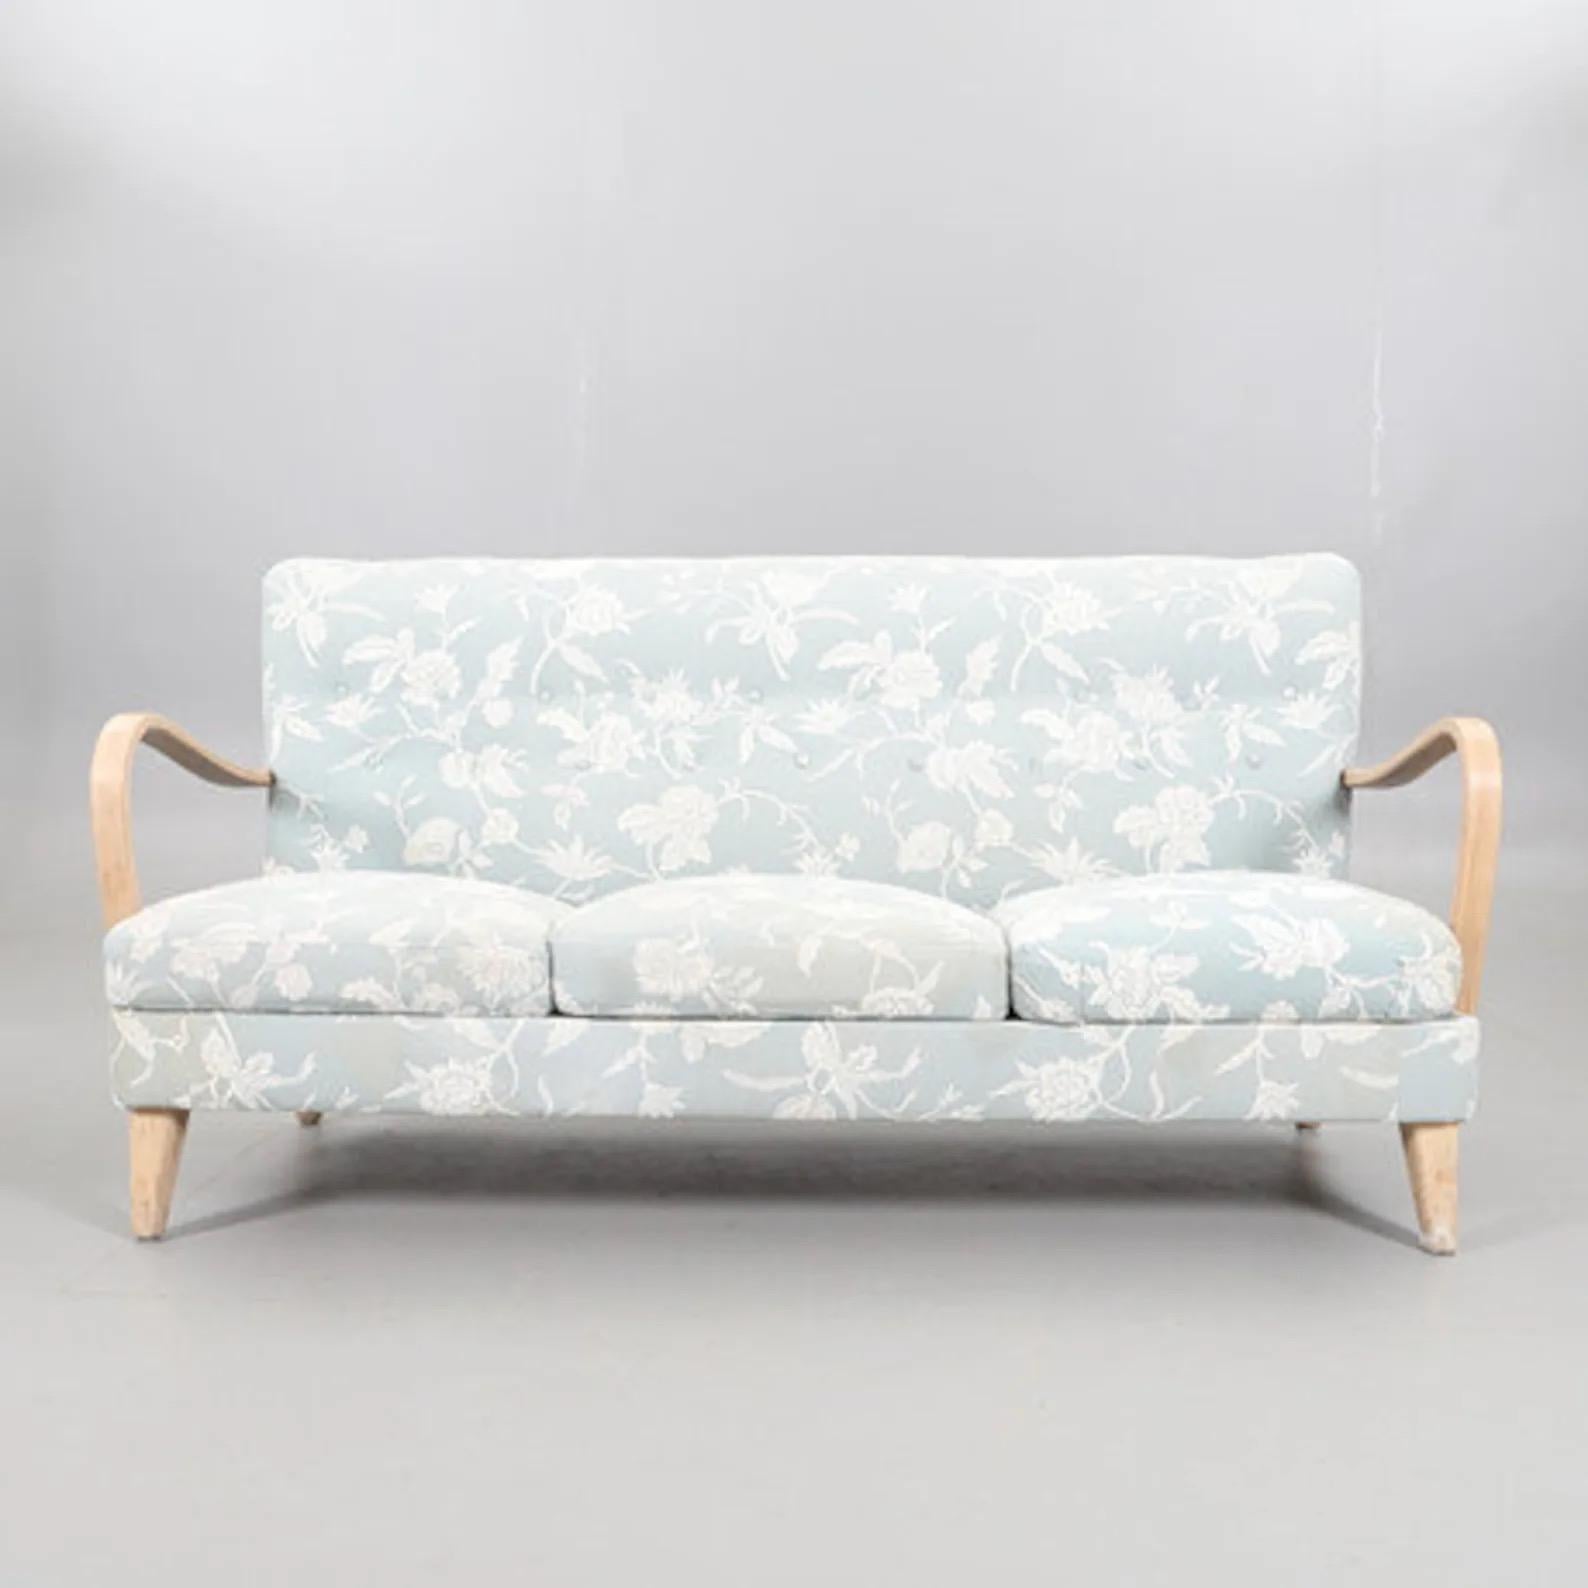 Midcentury Danish sofa/love seat with floral embroidery original Jane Churchill fabric. 
Dimensions: 
Arm to arm: 67 inches 
Seat height: 15 inches 
Interior depth: 21 inches 
High back: 33 inches 
Arms height: 24.5 inches.